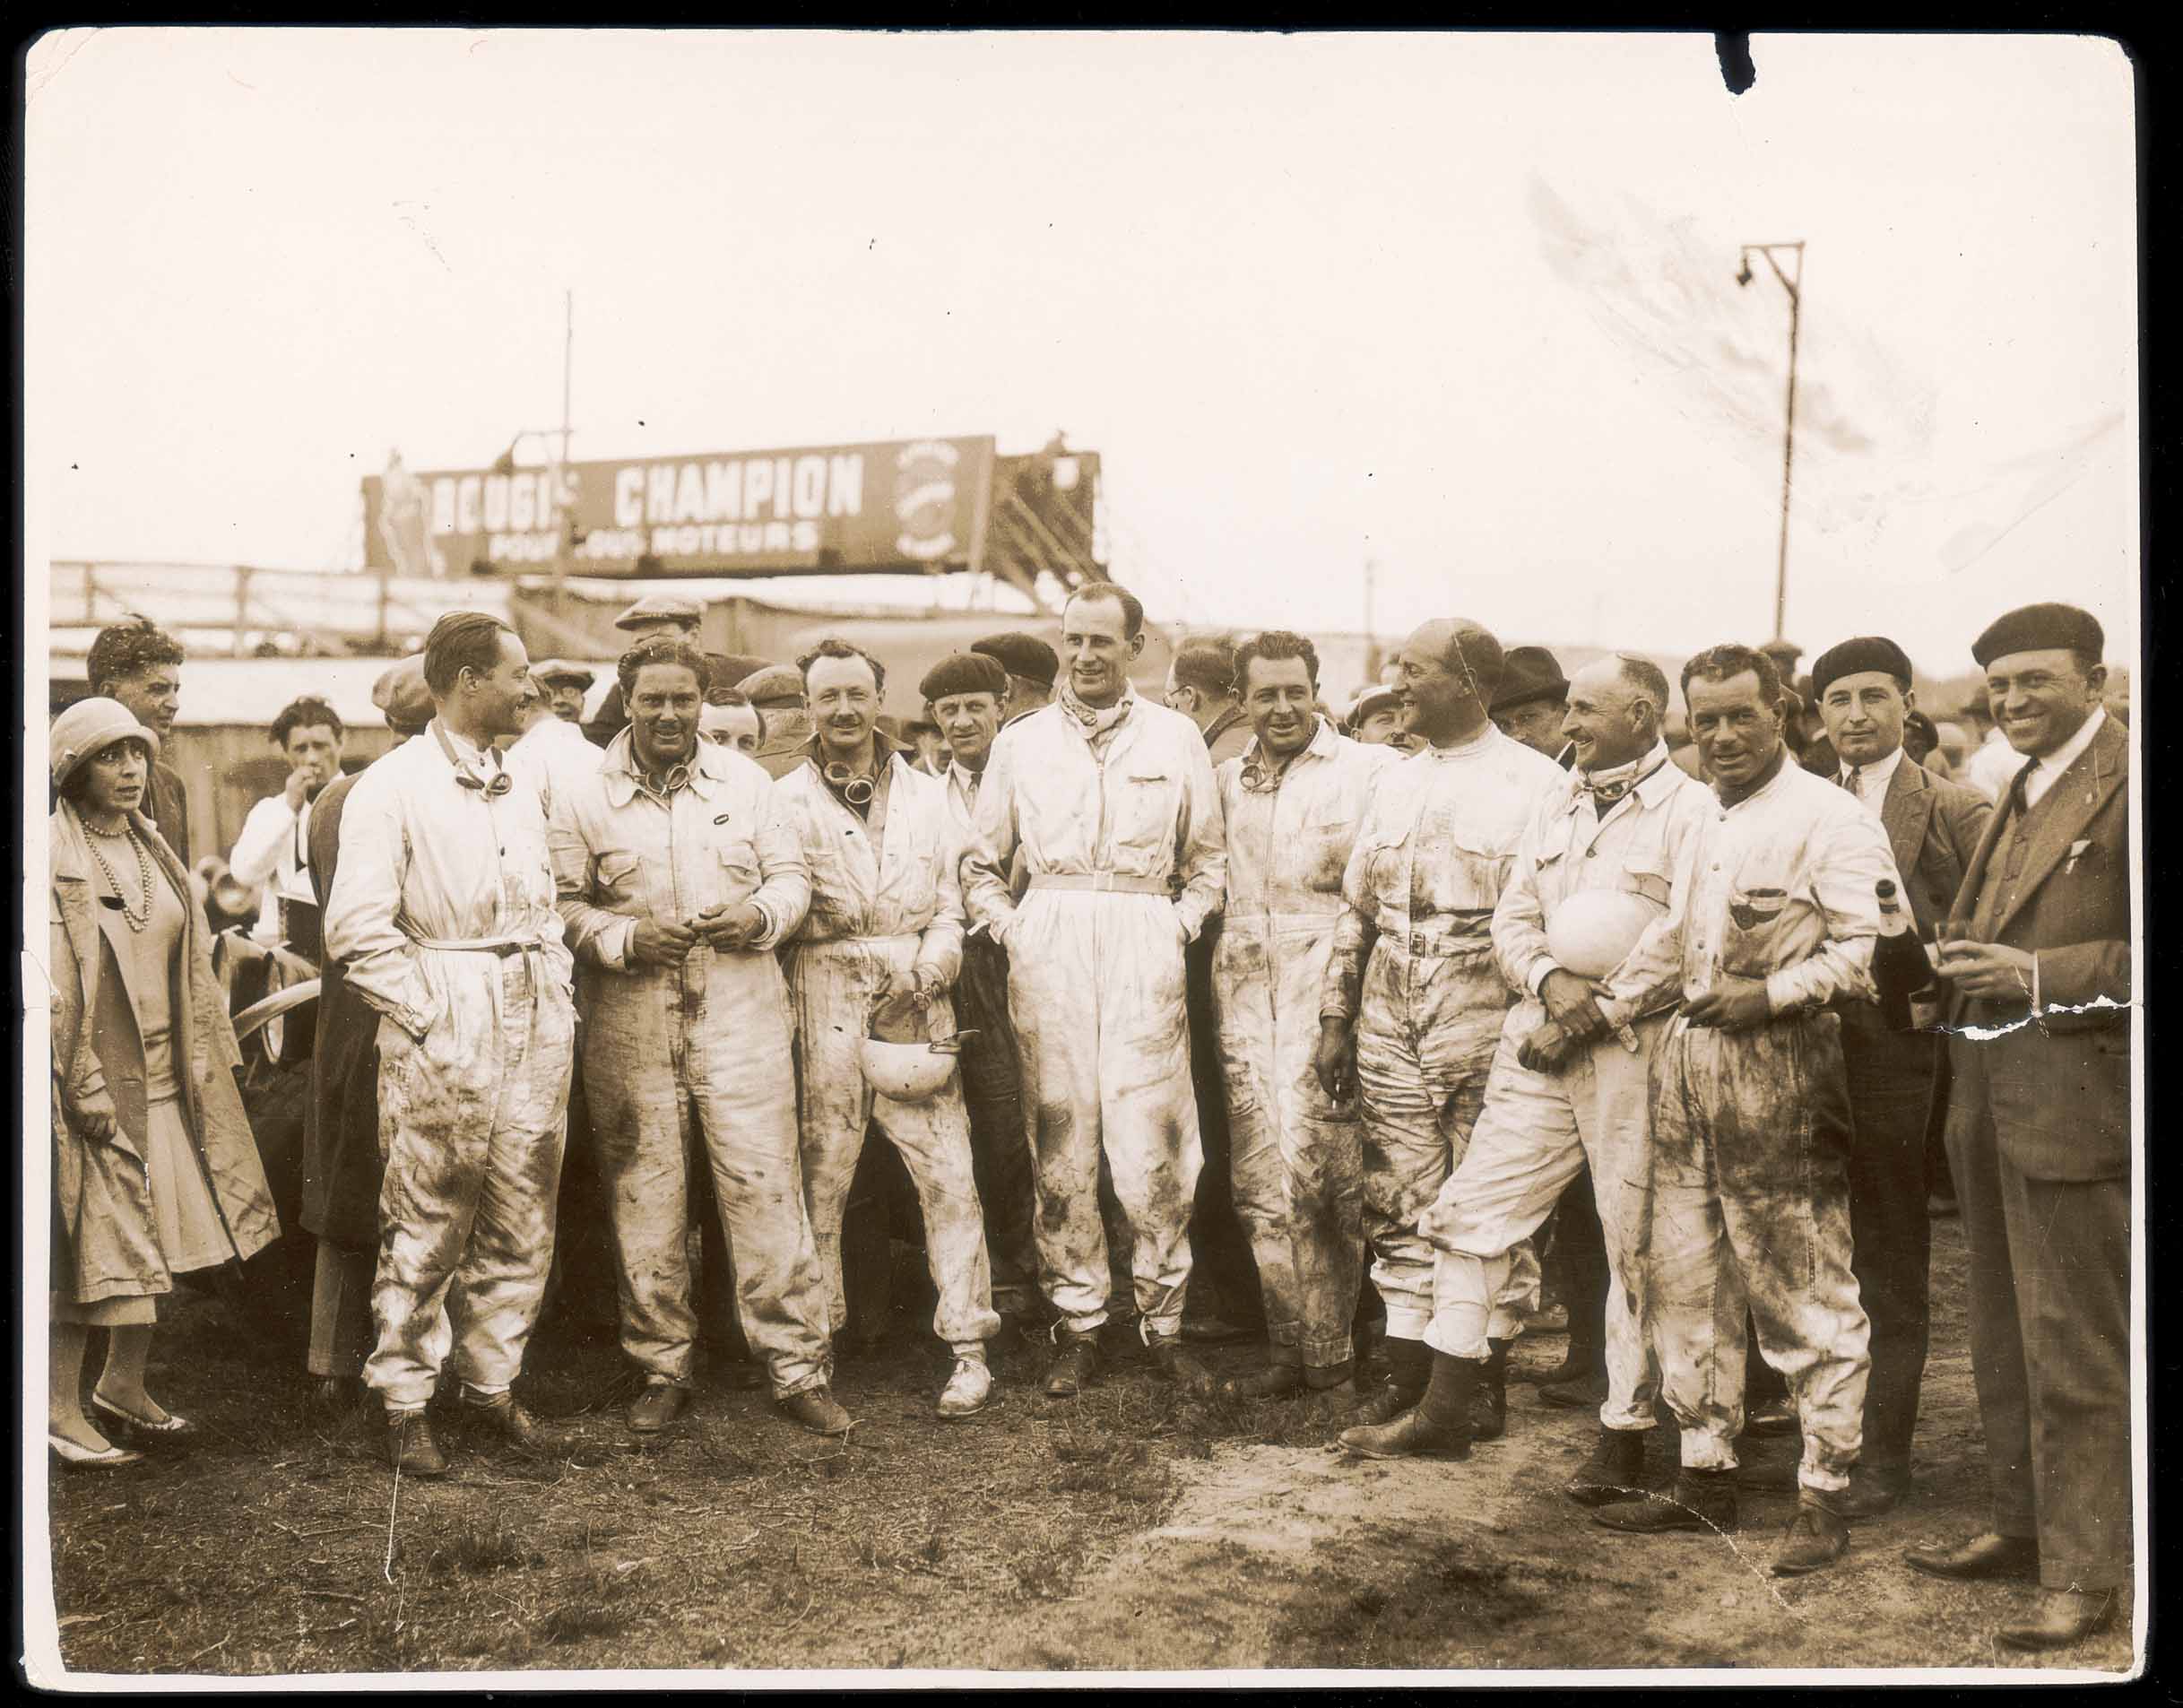 Bentley Boys winning drivers from Le Mans 1929